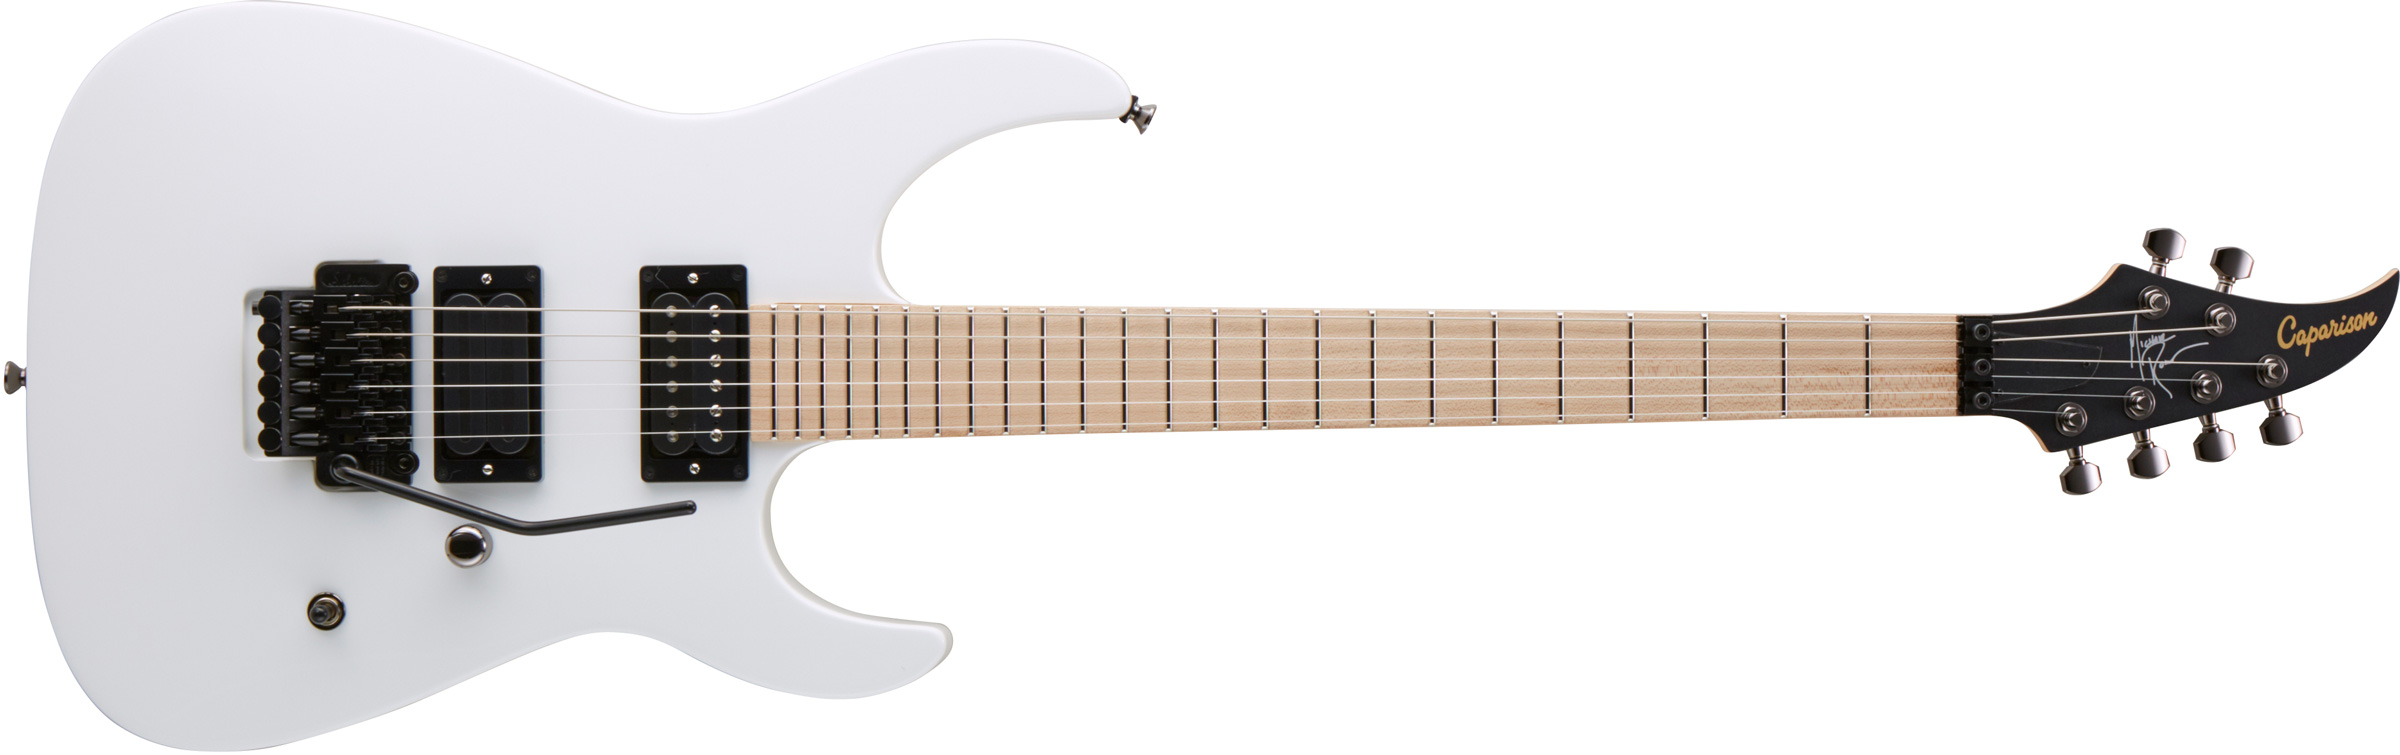 Caparison Guitars Products - Electric Guitars and Basses